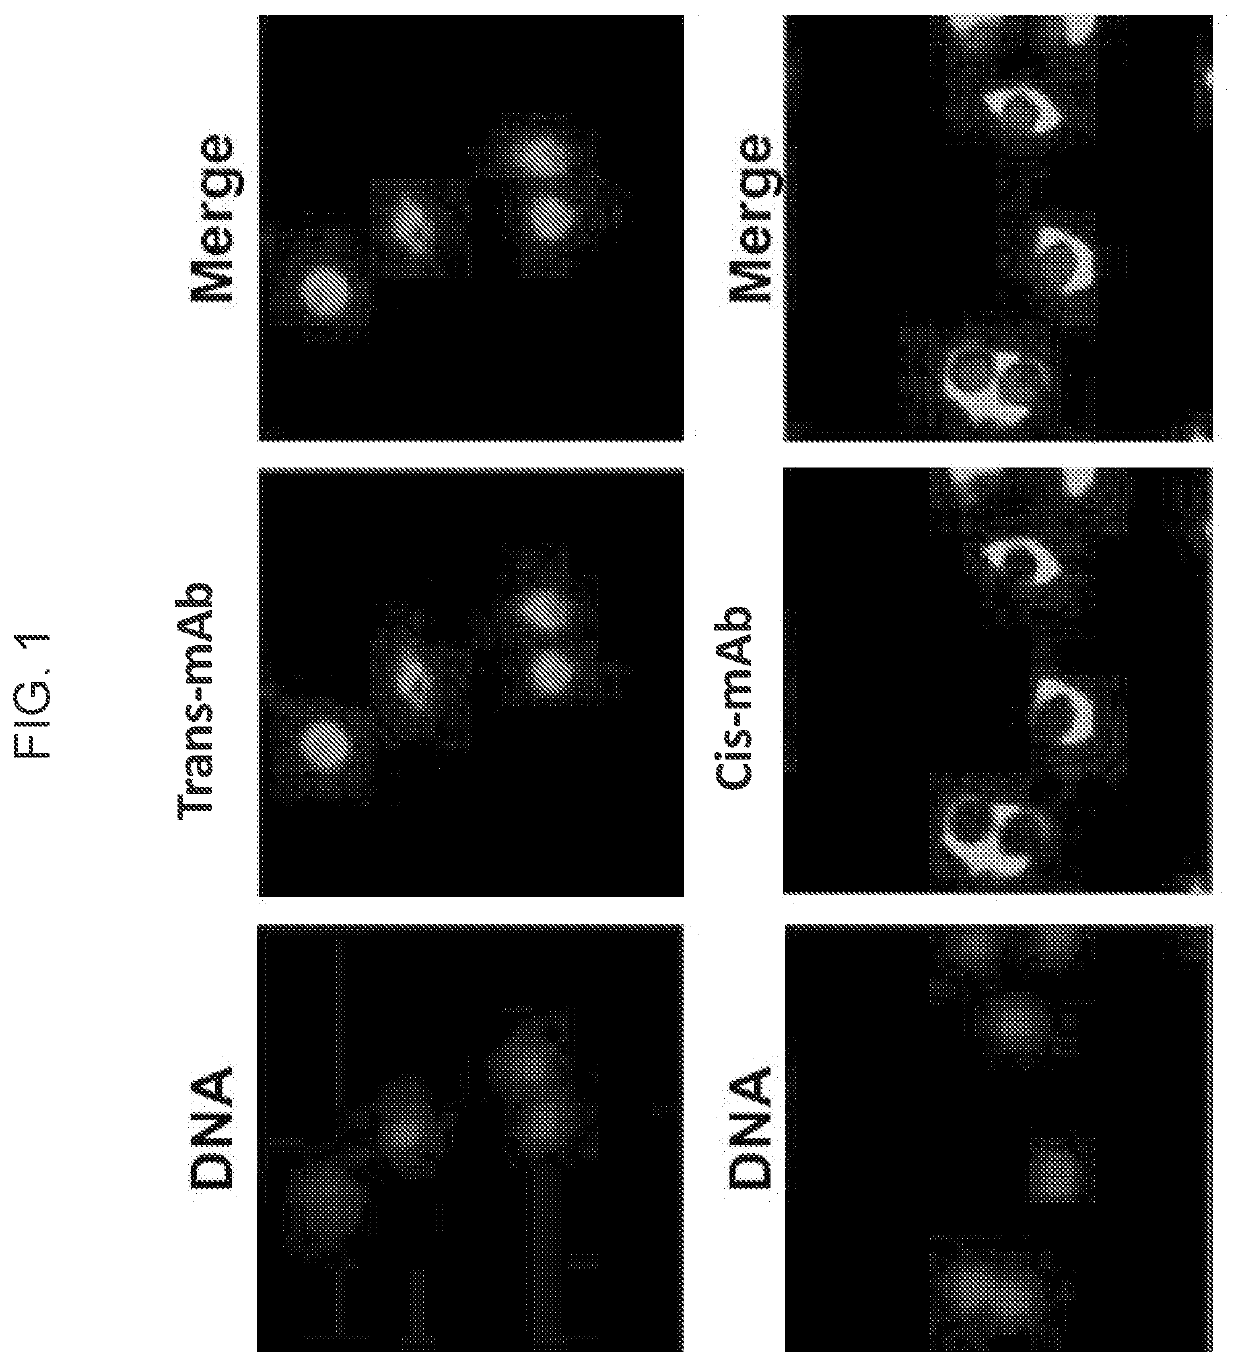 Conformation-specific antibodies that bind nuclear factor kappa-light-chain-enhancer of activated b cells